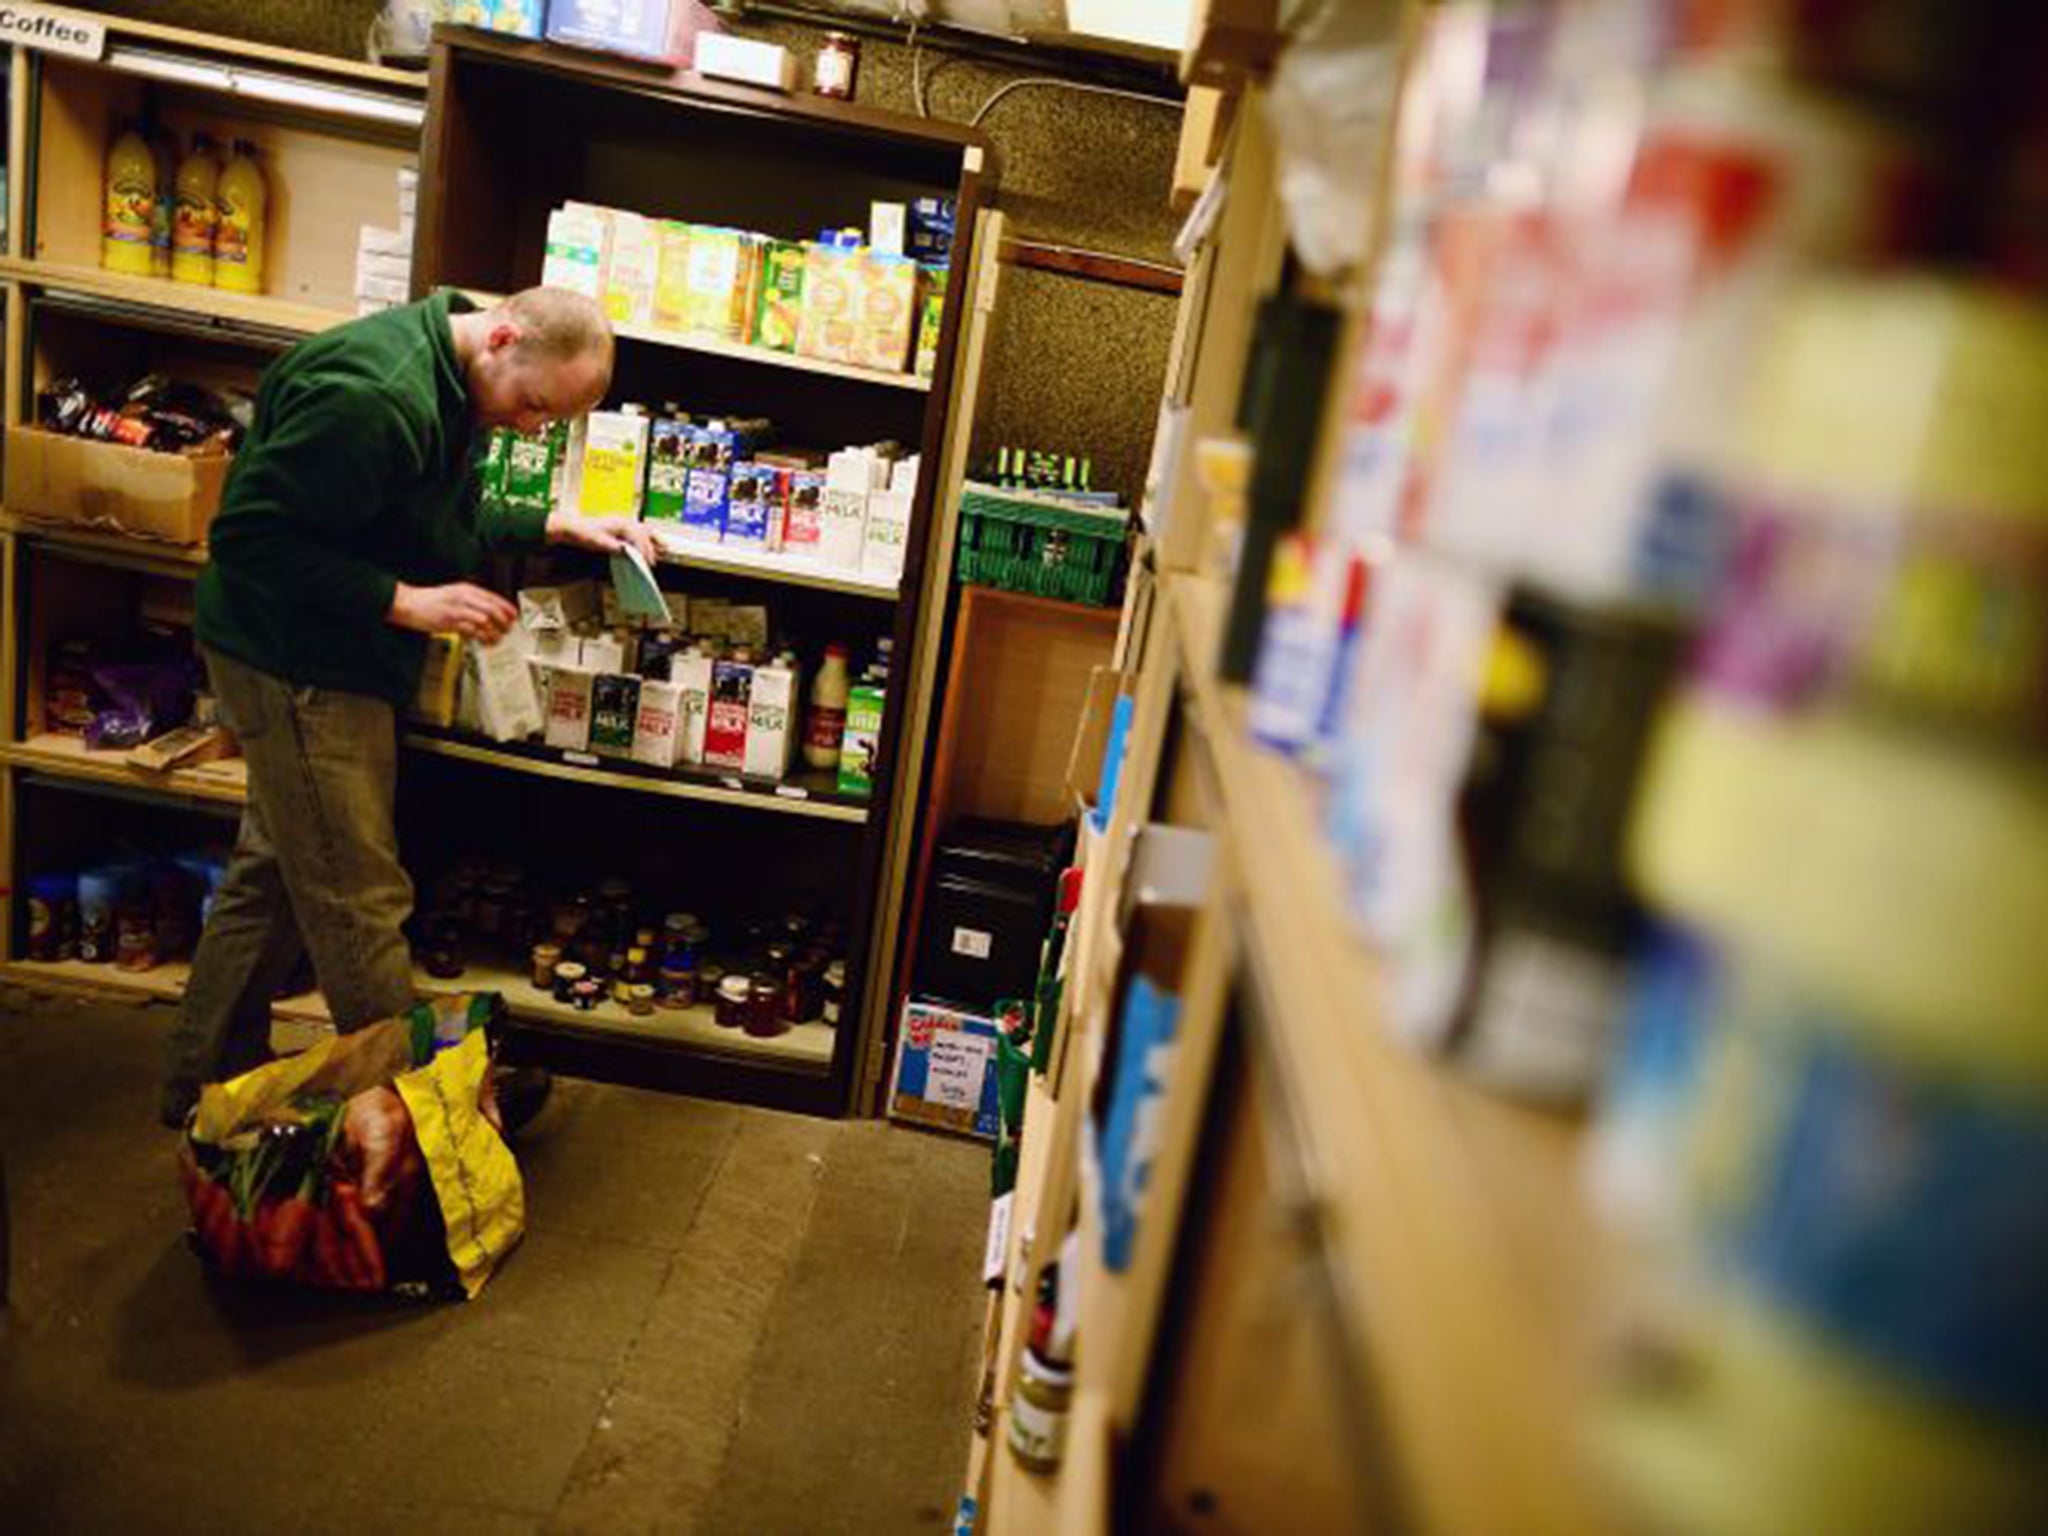 Nearly a million people were helped by food banks in 2013-14